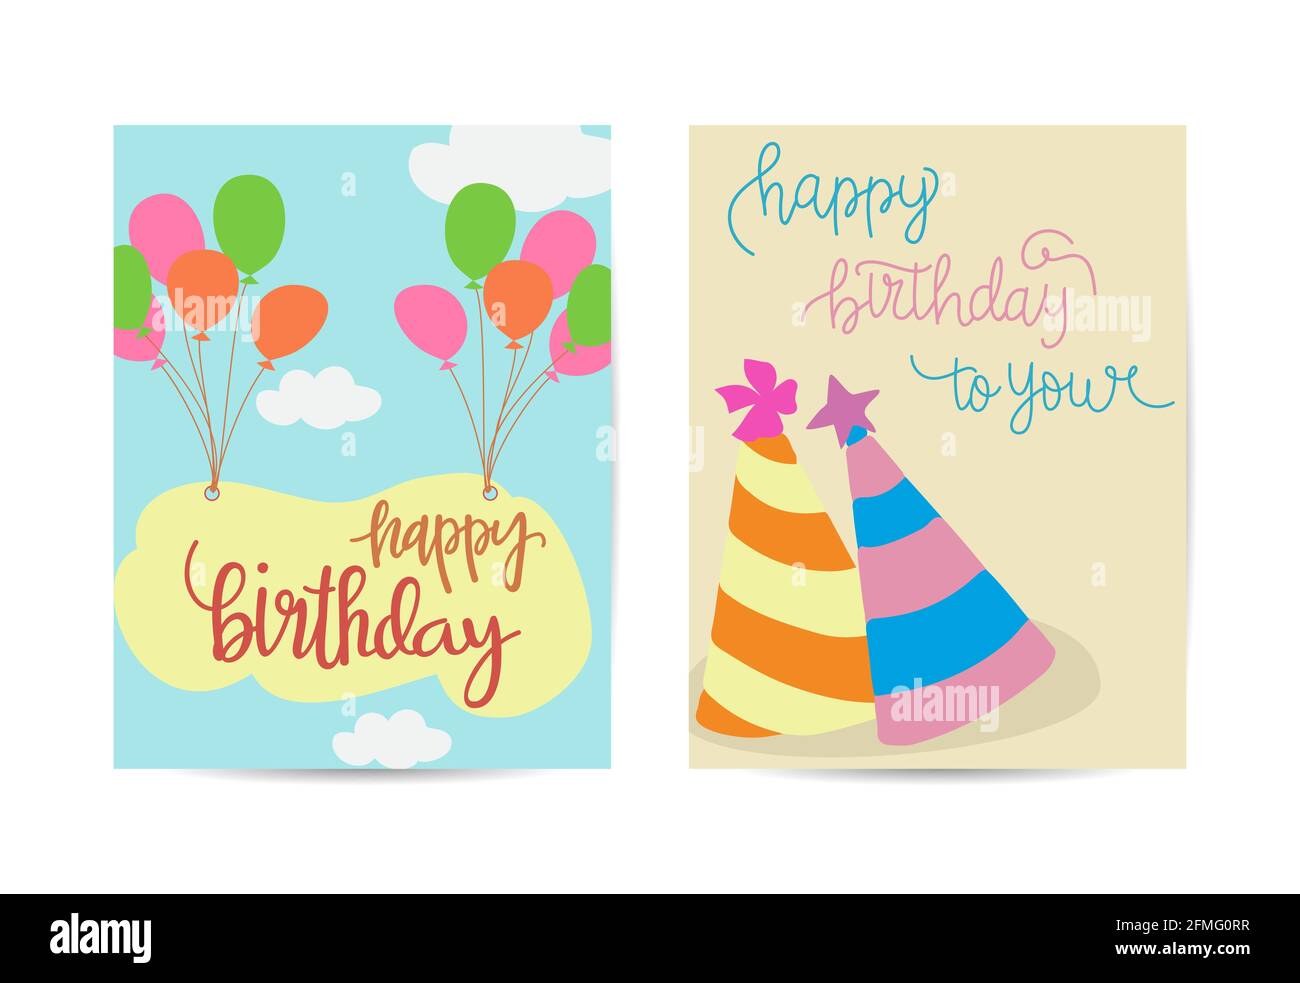 Set of colorful birthday cards design Stock Vector